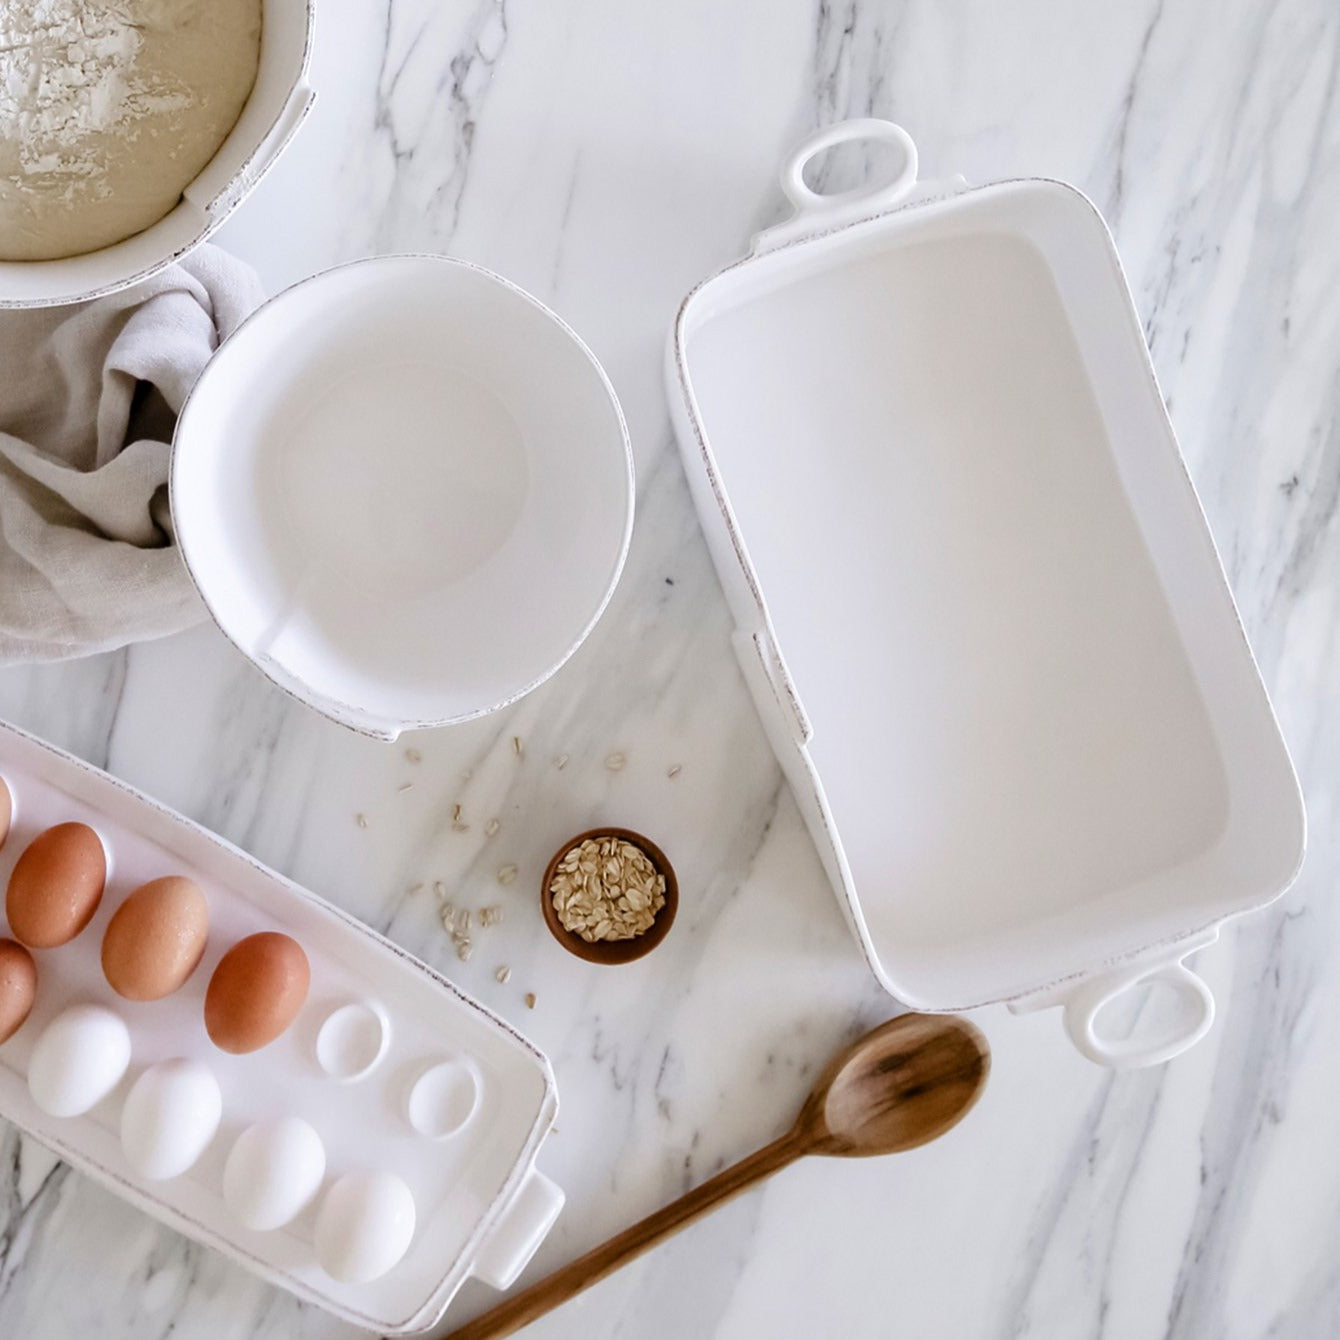 baking dish, bowl, and tray of eggs arranged on marble  countertop with spoon and seasonings.